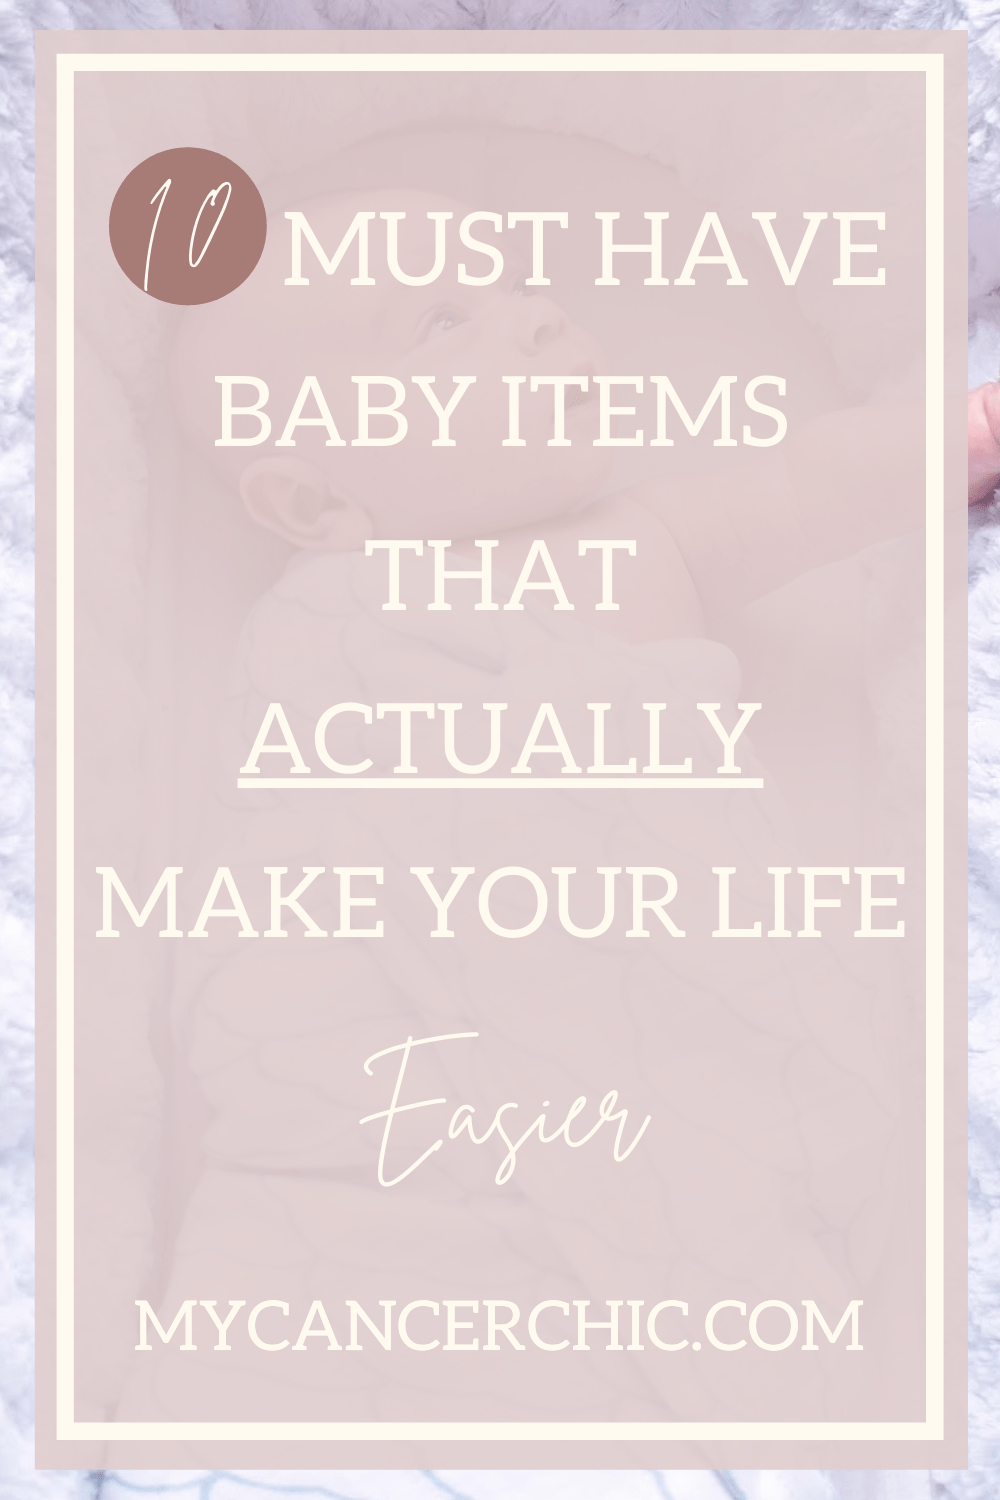 must have baby items you actually need graphic title image